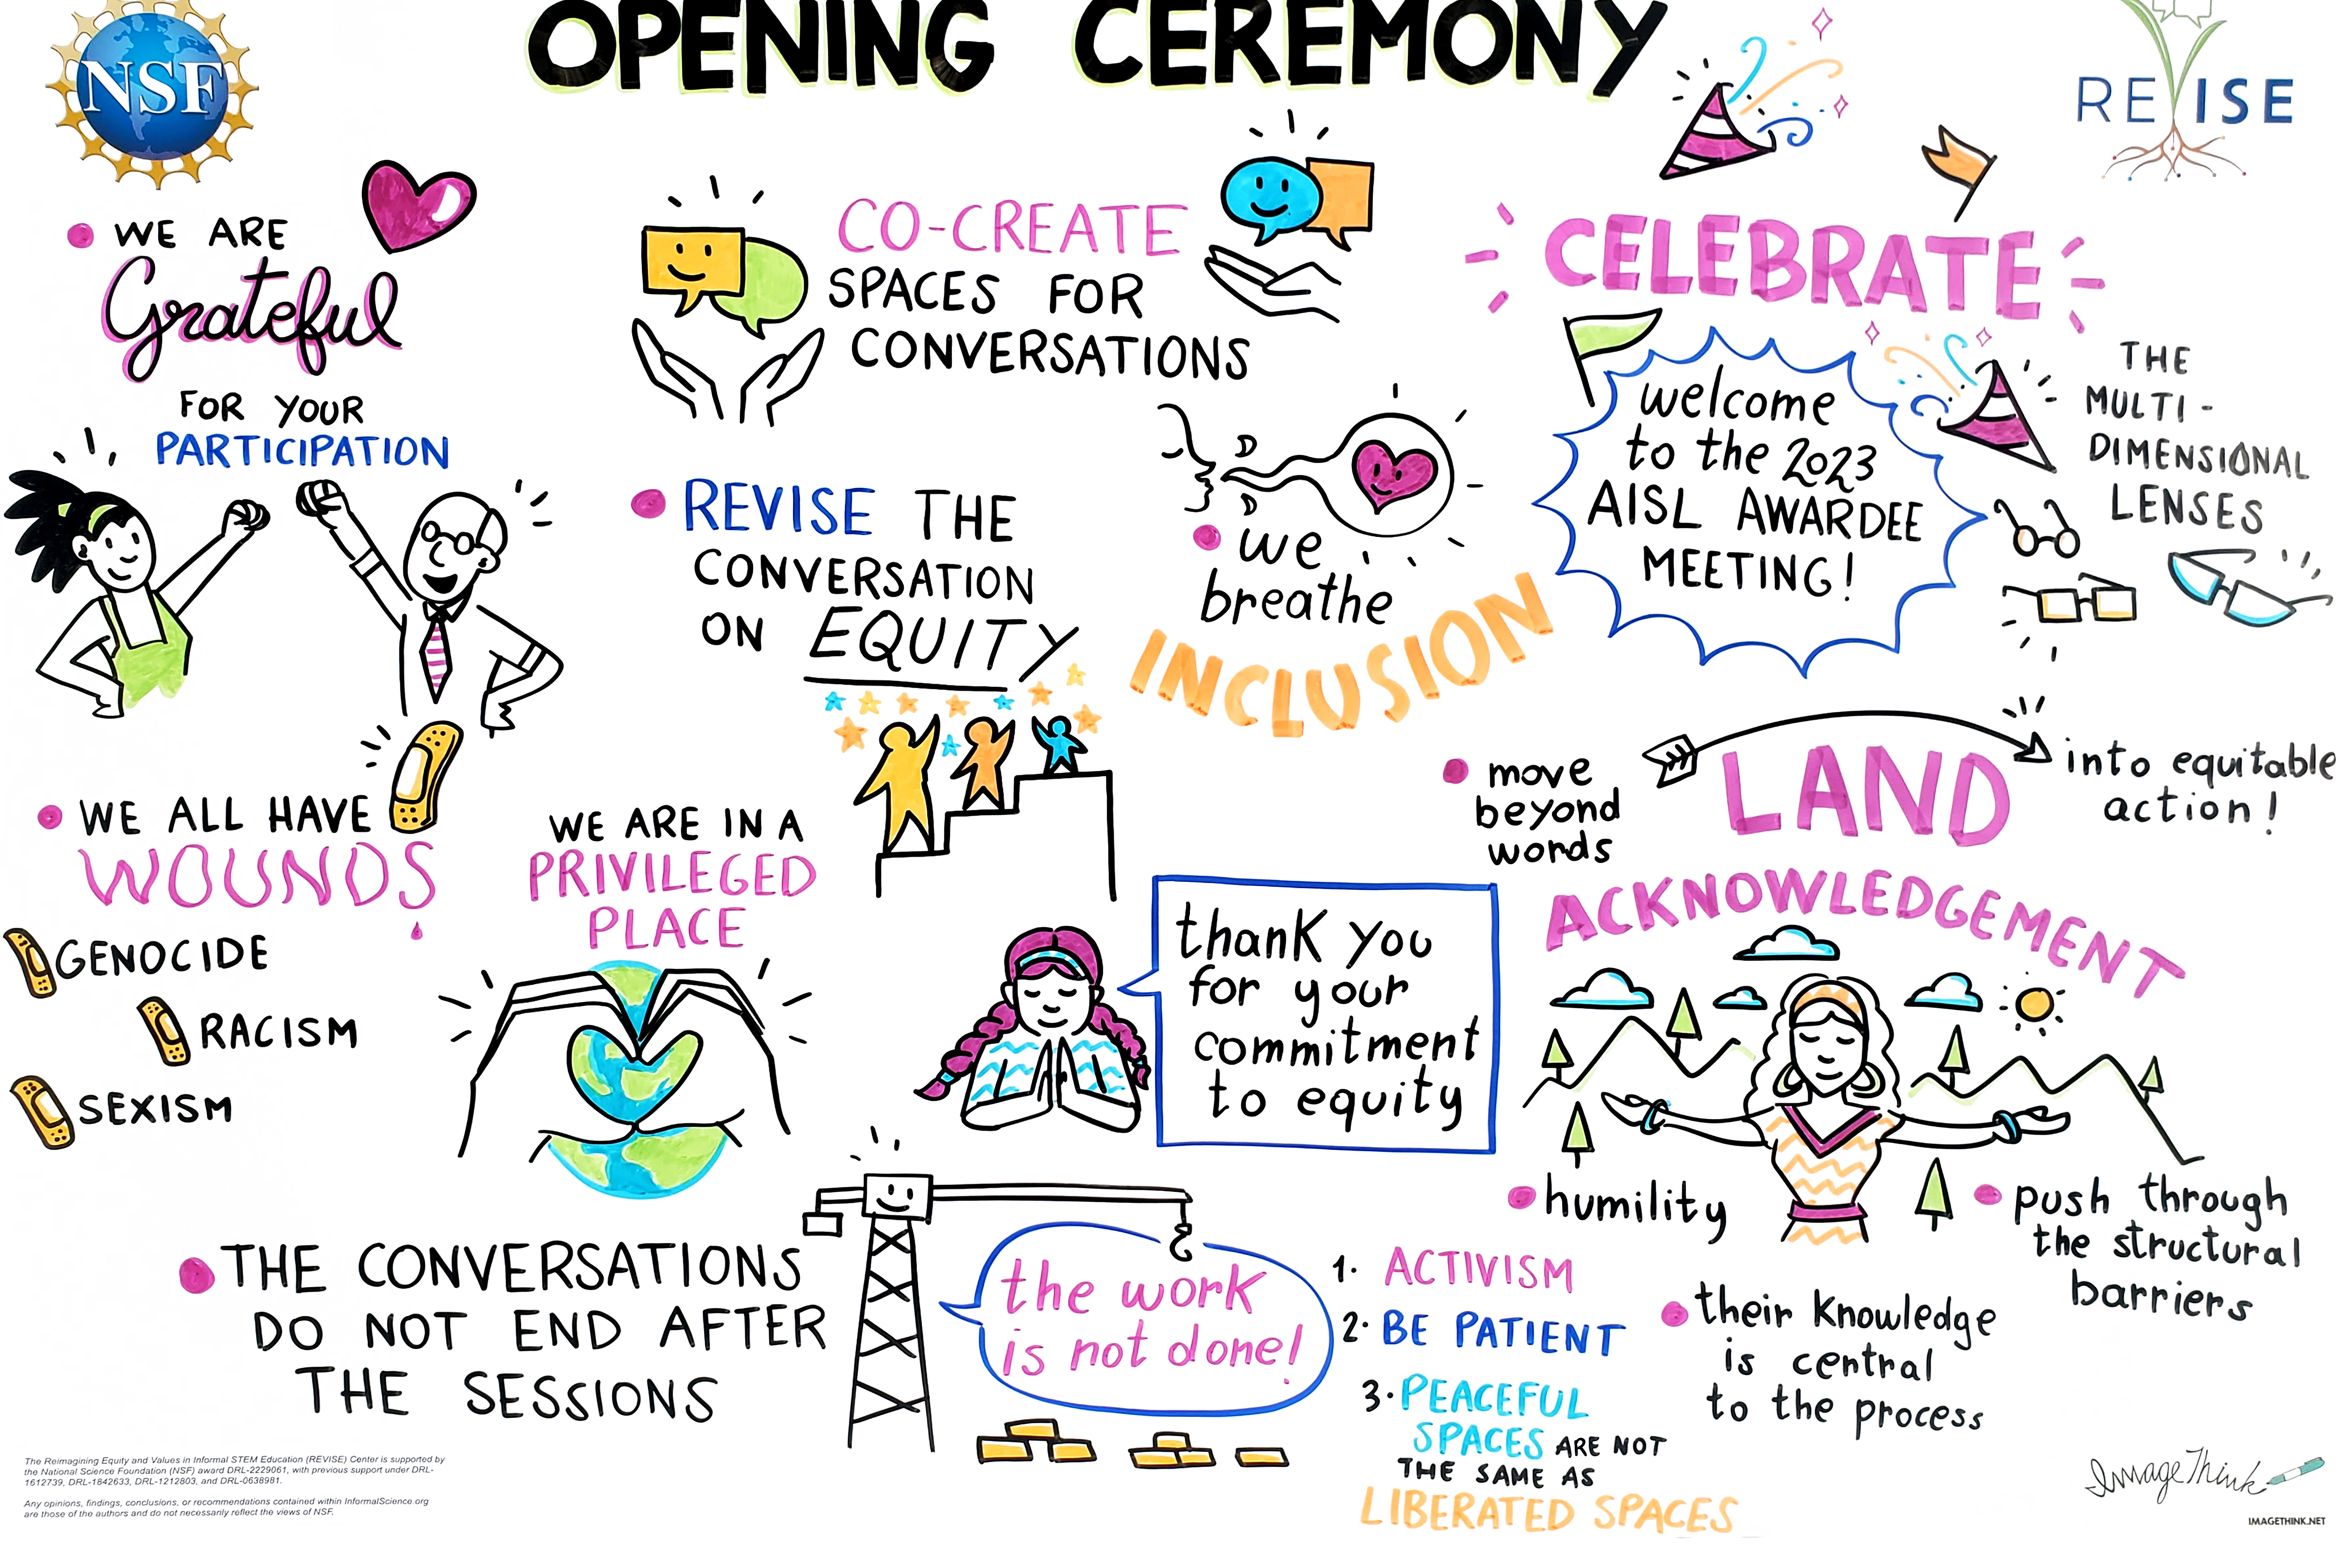 Image contains a graphic illustration of the 2023 AISL Awardee Meeting opening ceremony.